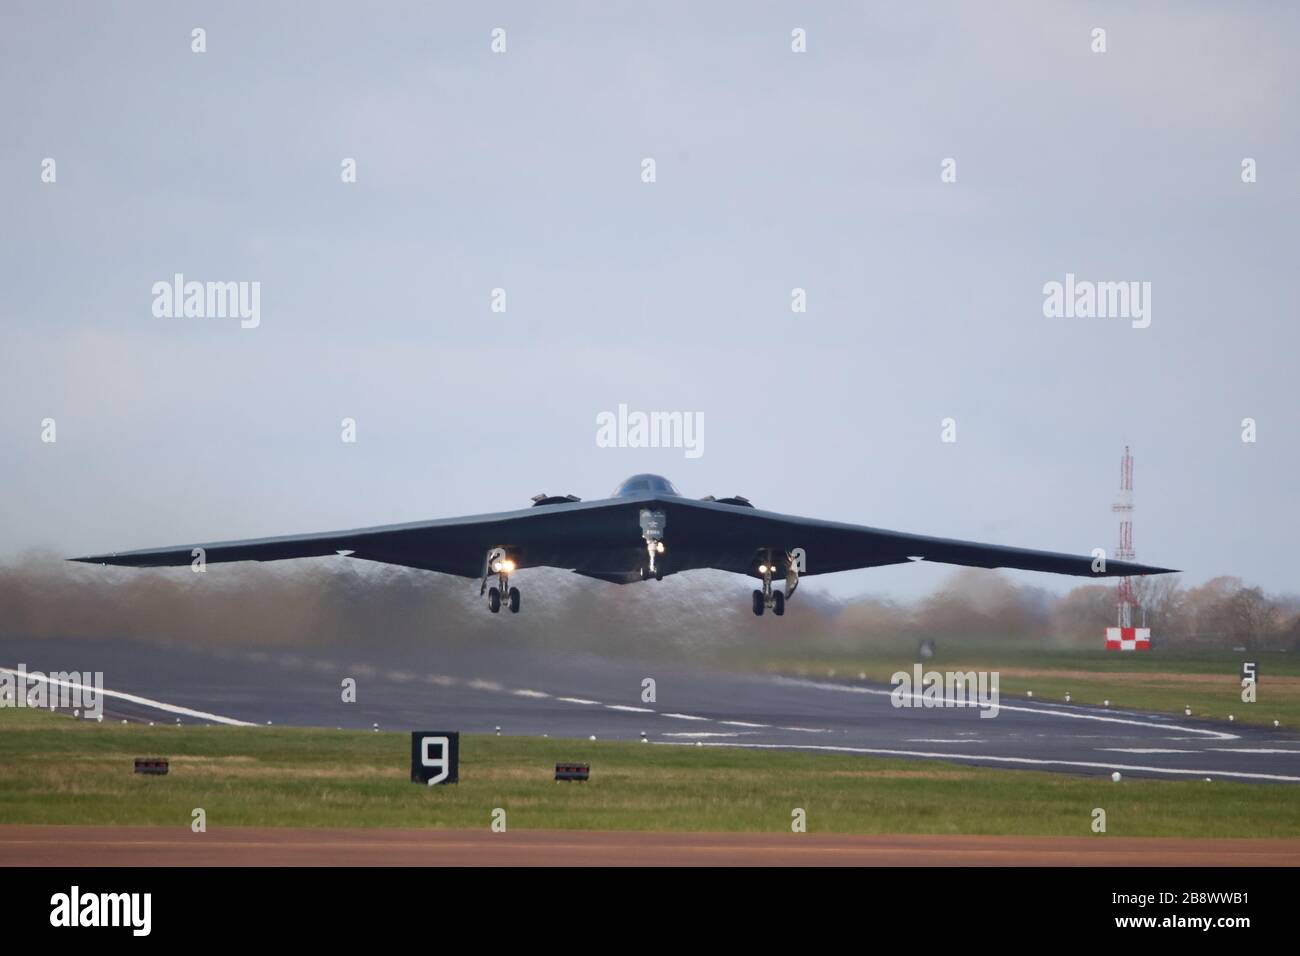 Northrop Grumman B-2 Spirit stealth bomber leaving for the USA after exercises in Europe, RAF Fairford, UK Stock Photo